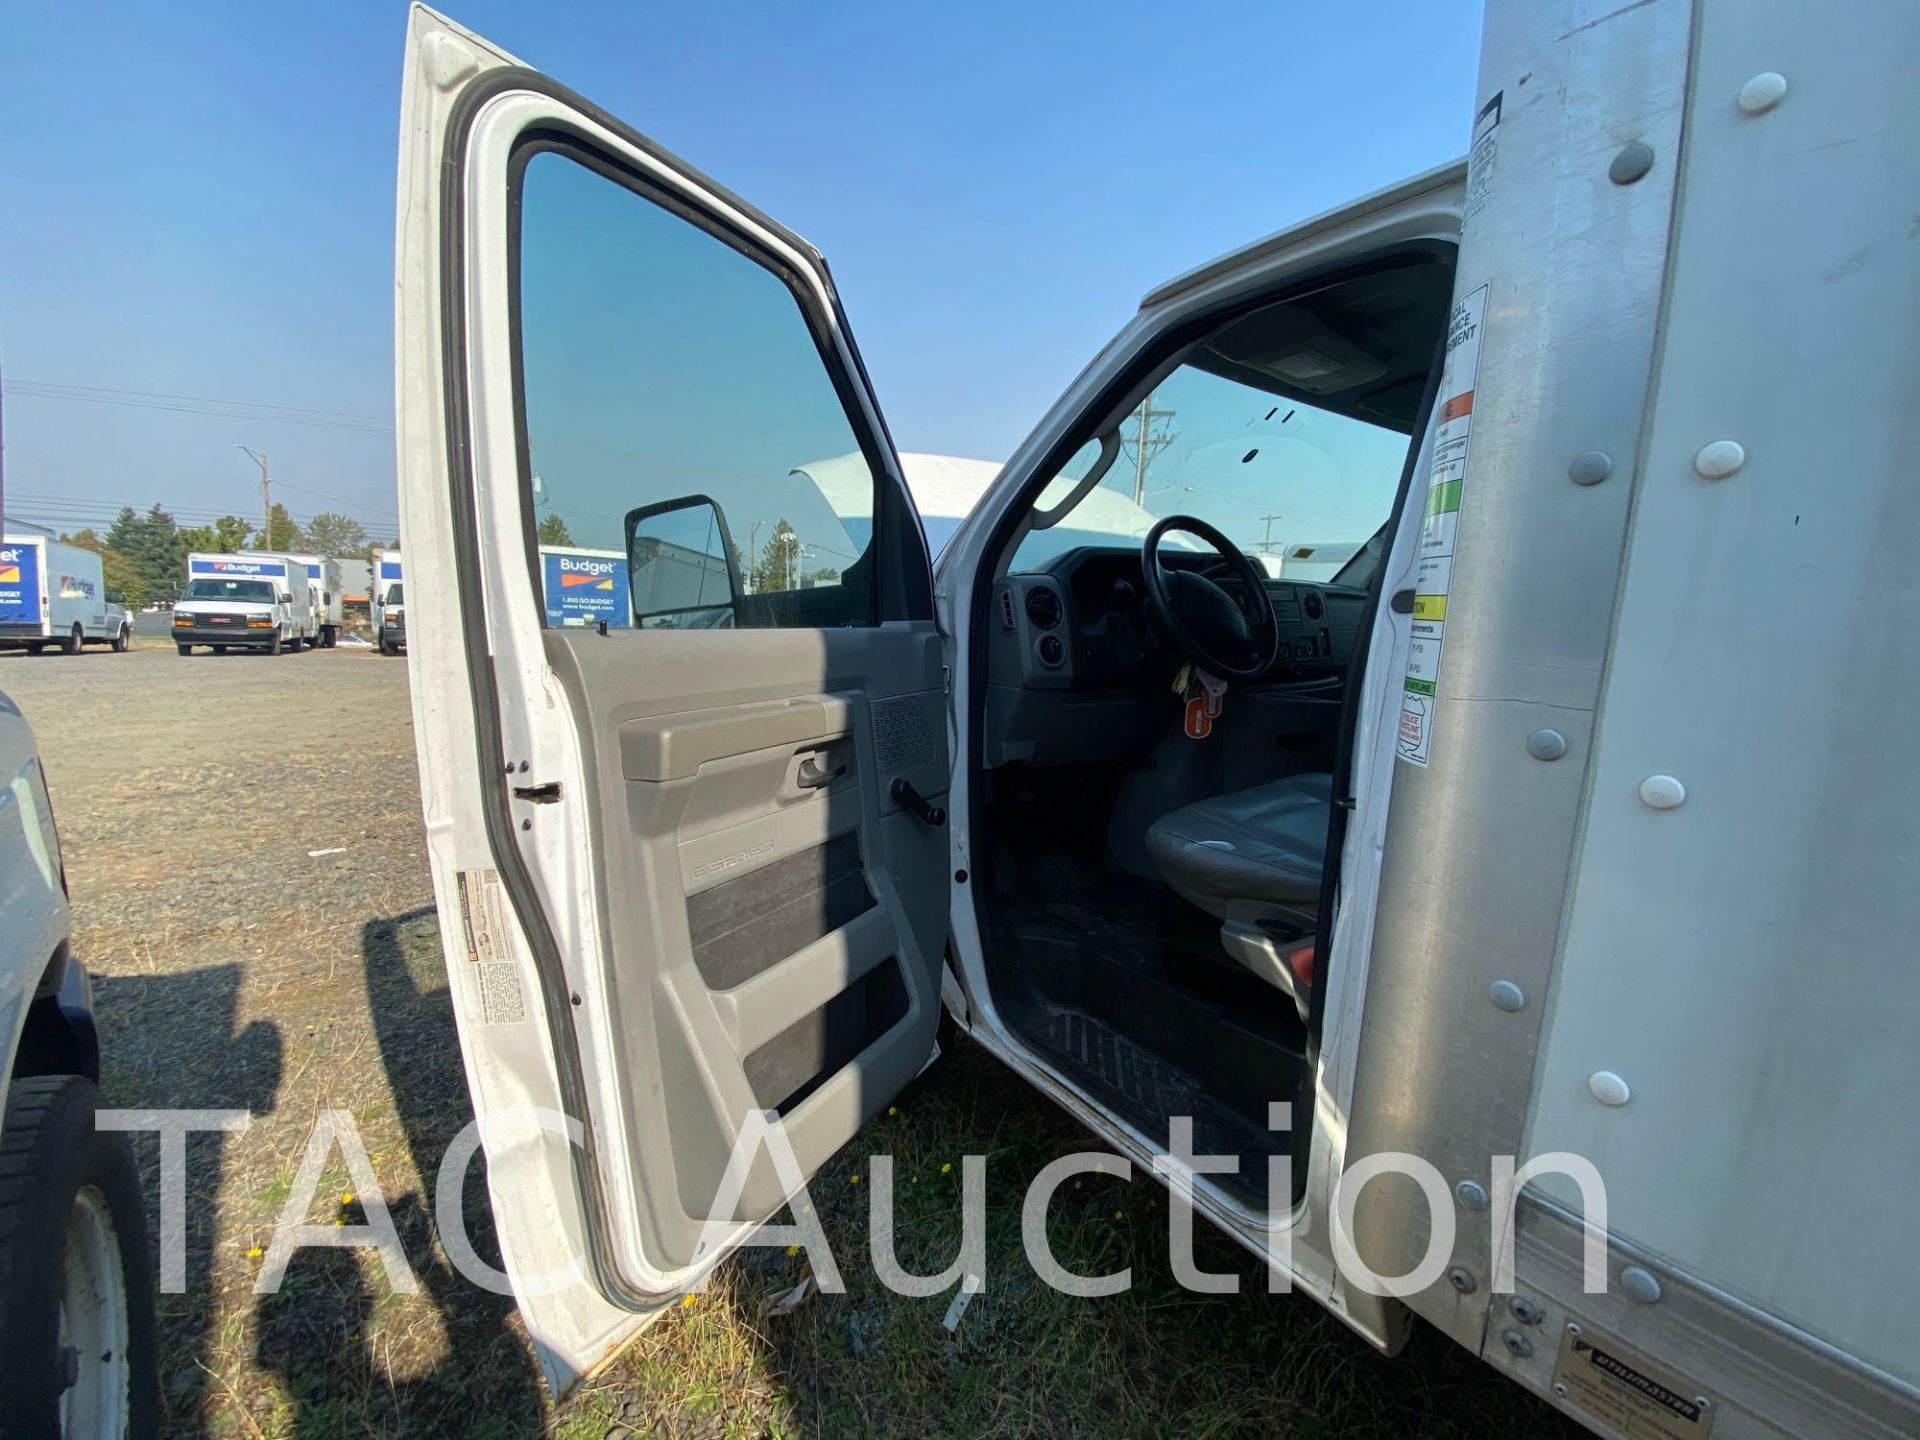 2015 Ford E-350 16ft Box Truck - Image 35 of 106